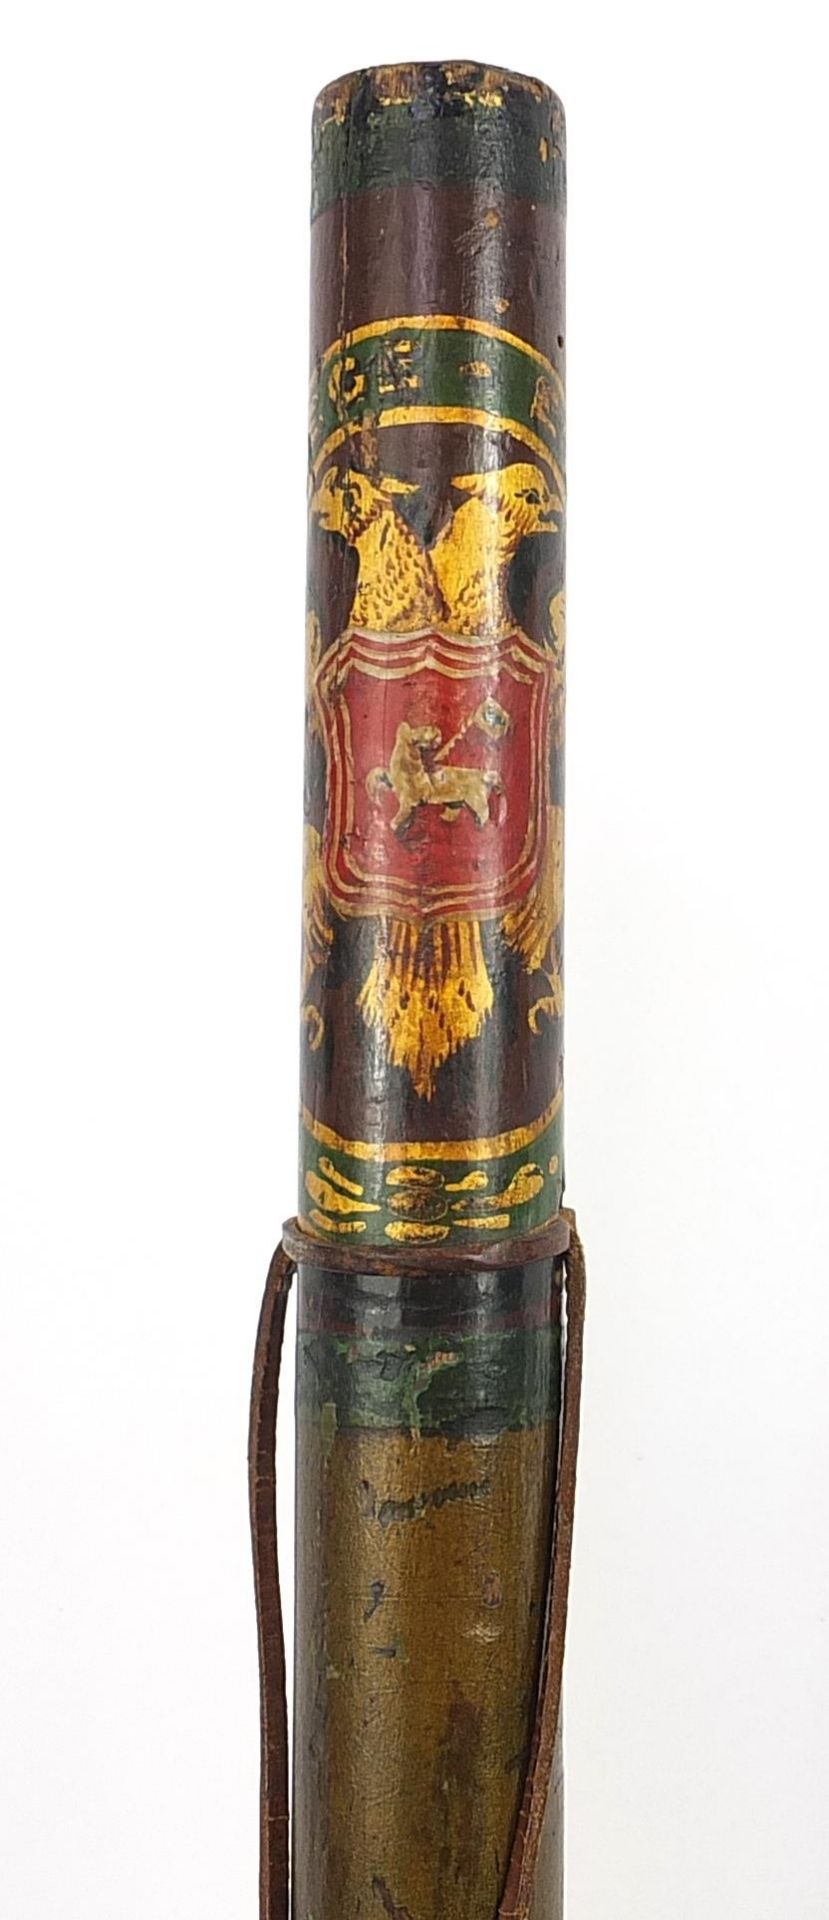 Perth High Constable's baton hand painted with crests, 69cm in length - Image 3 of 3